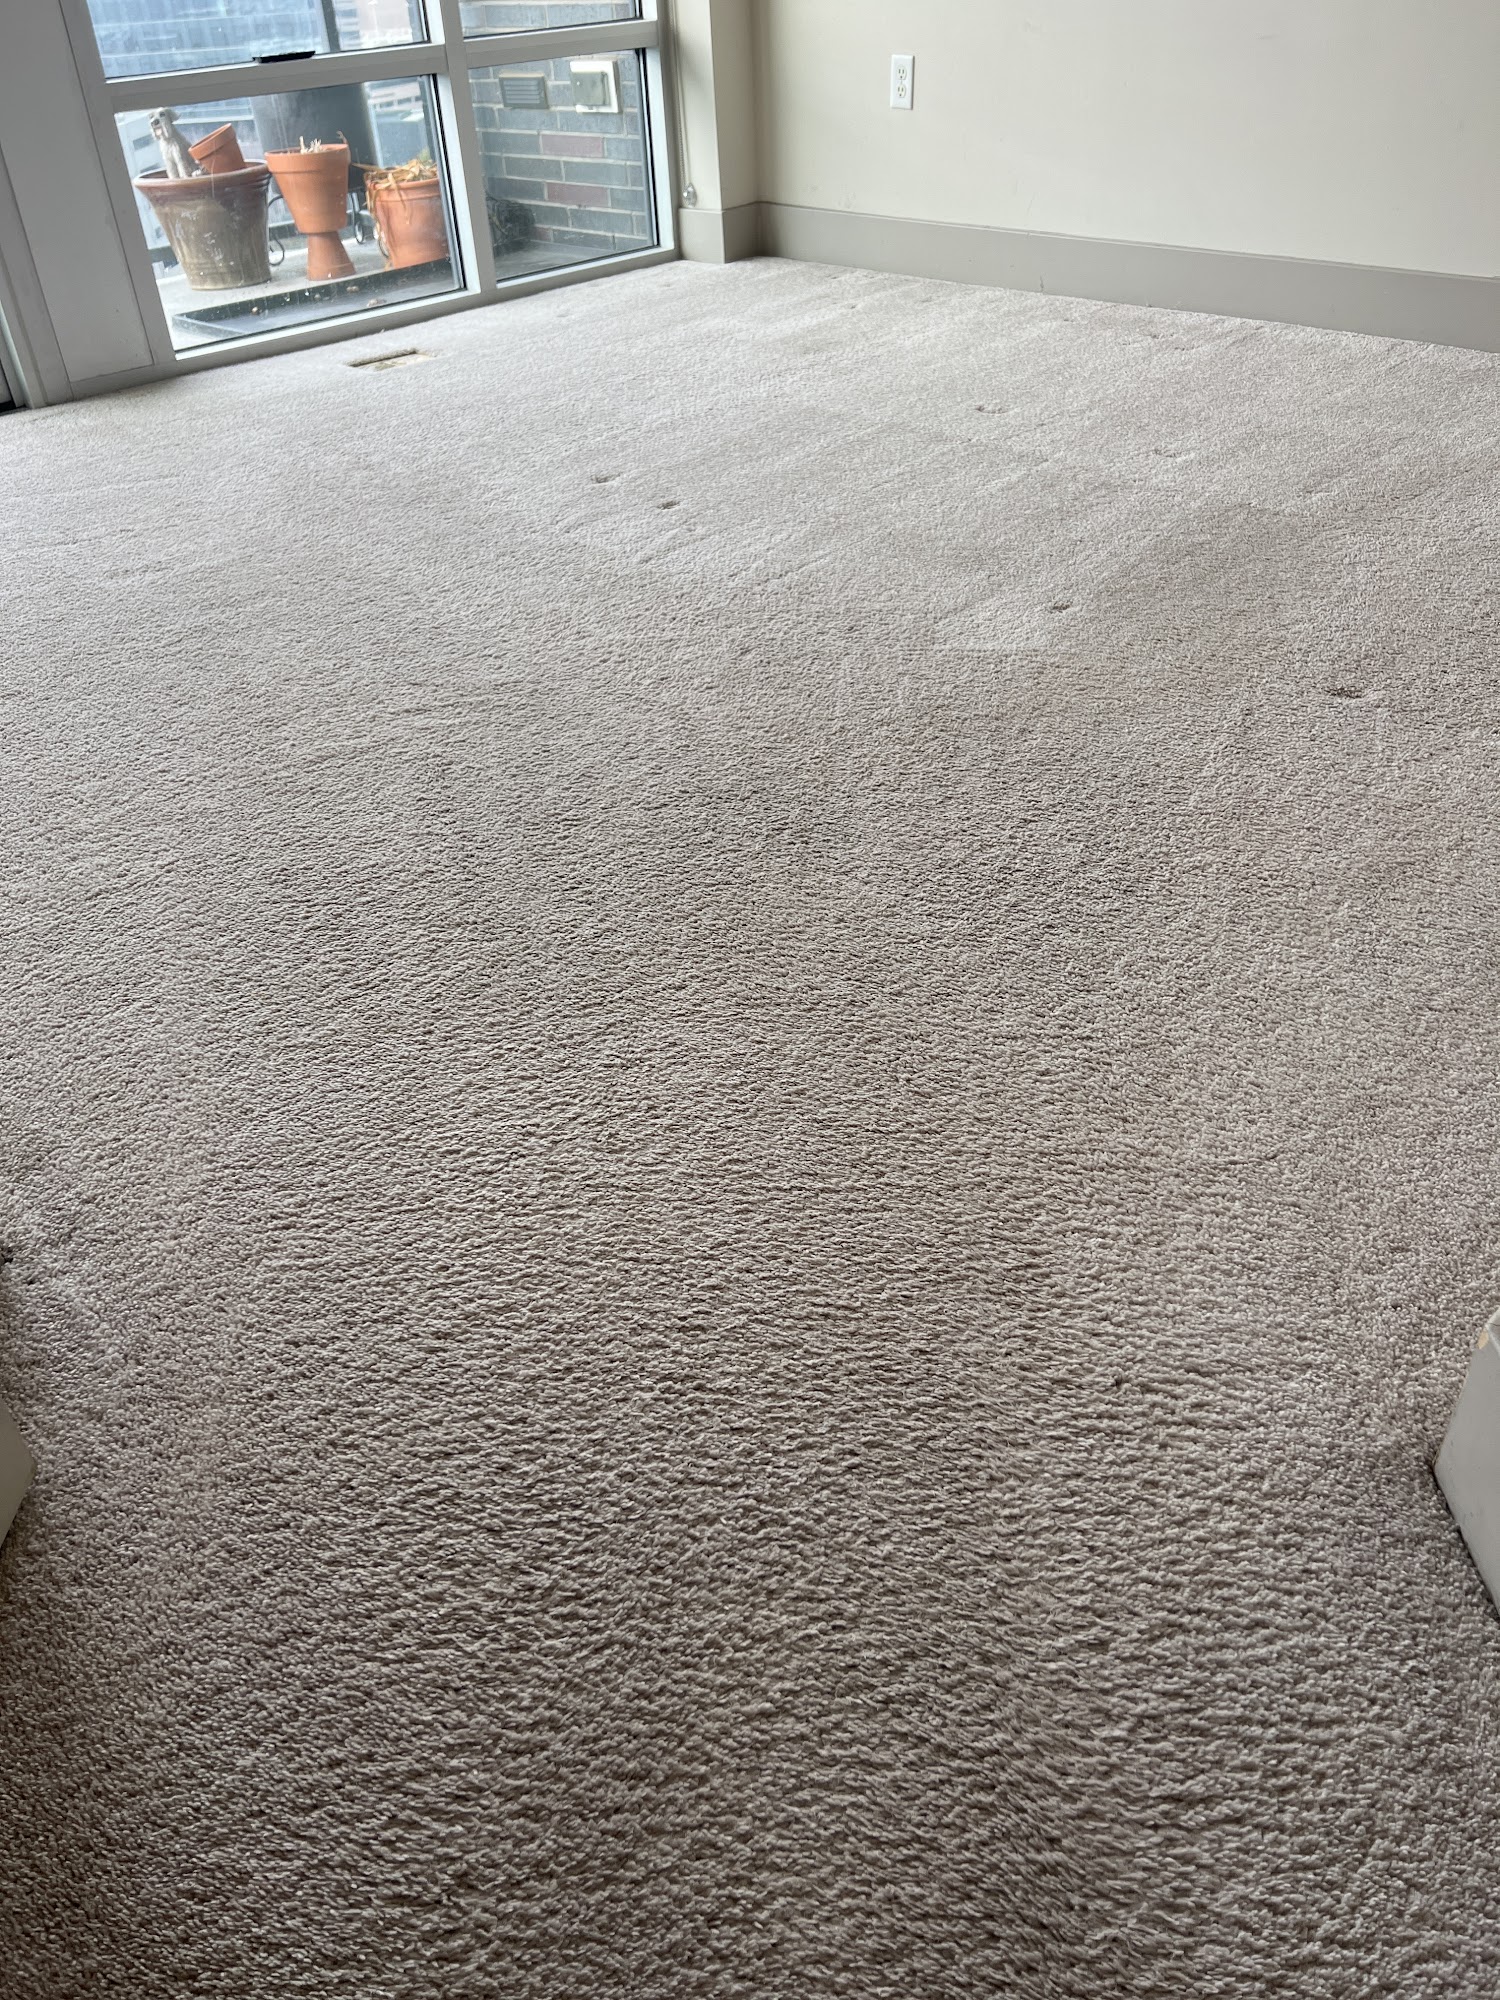 Shiny Carpet Cleaning